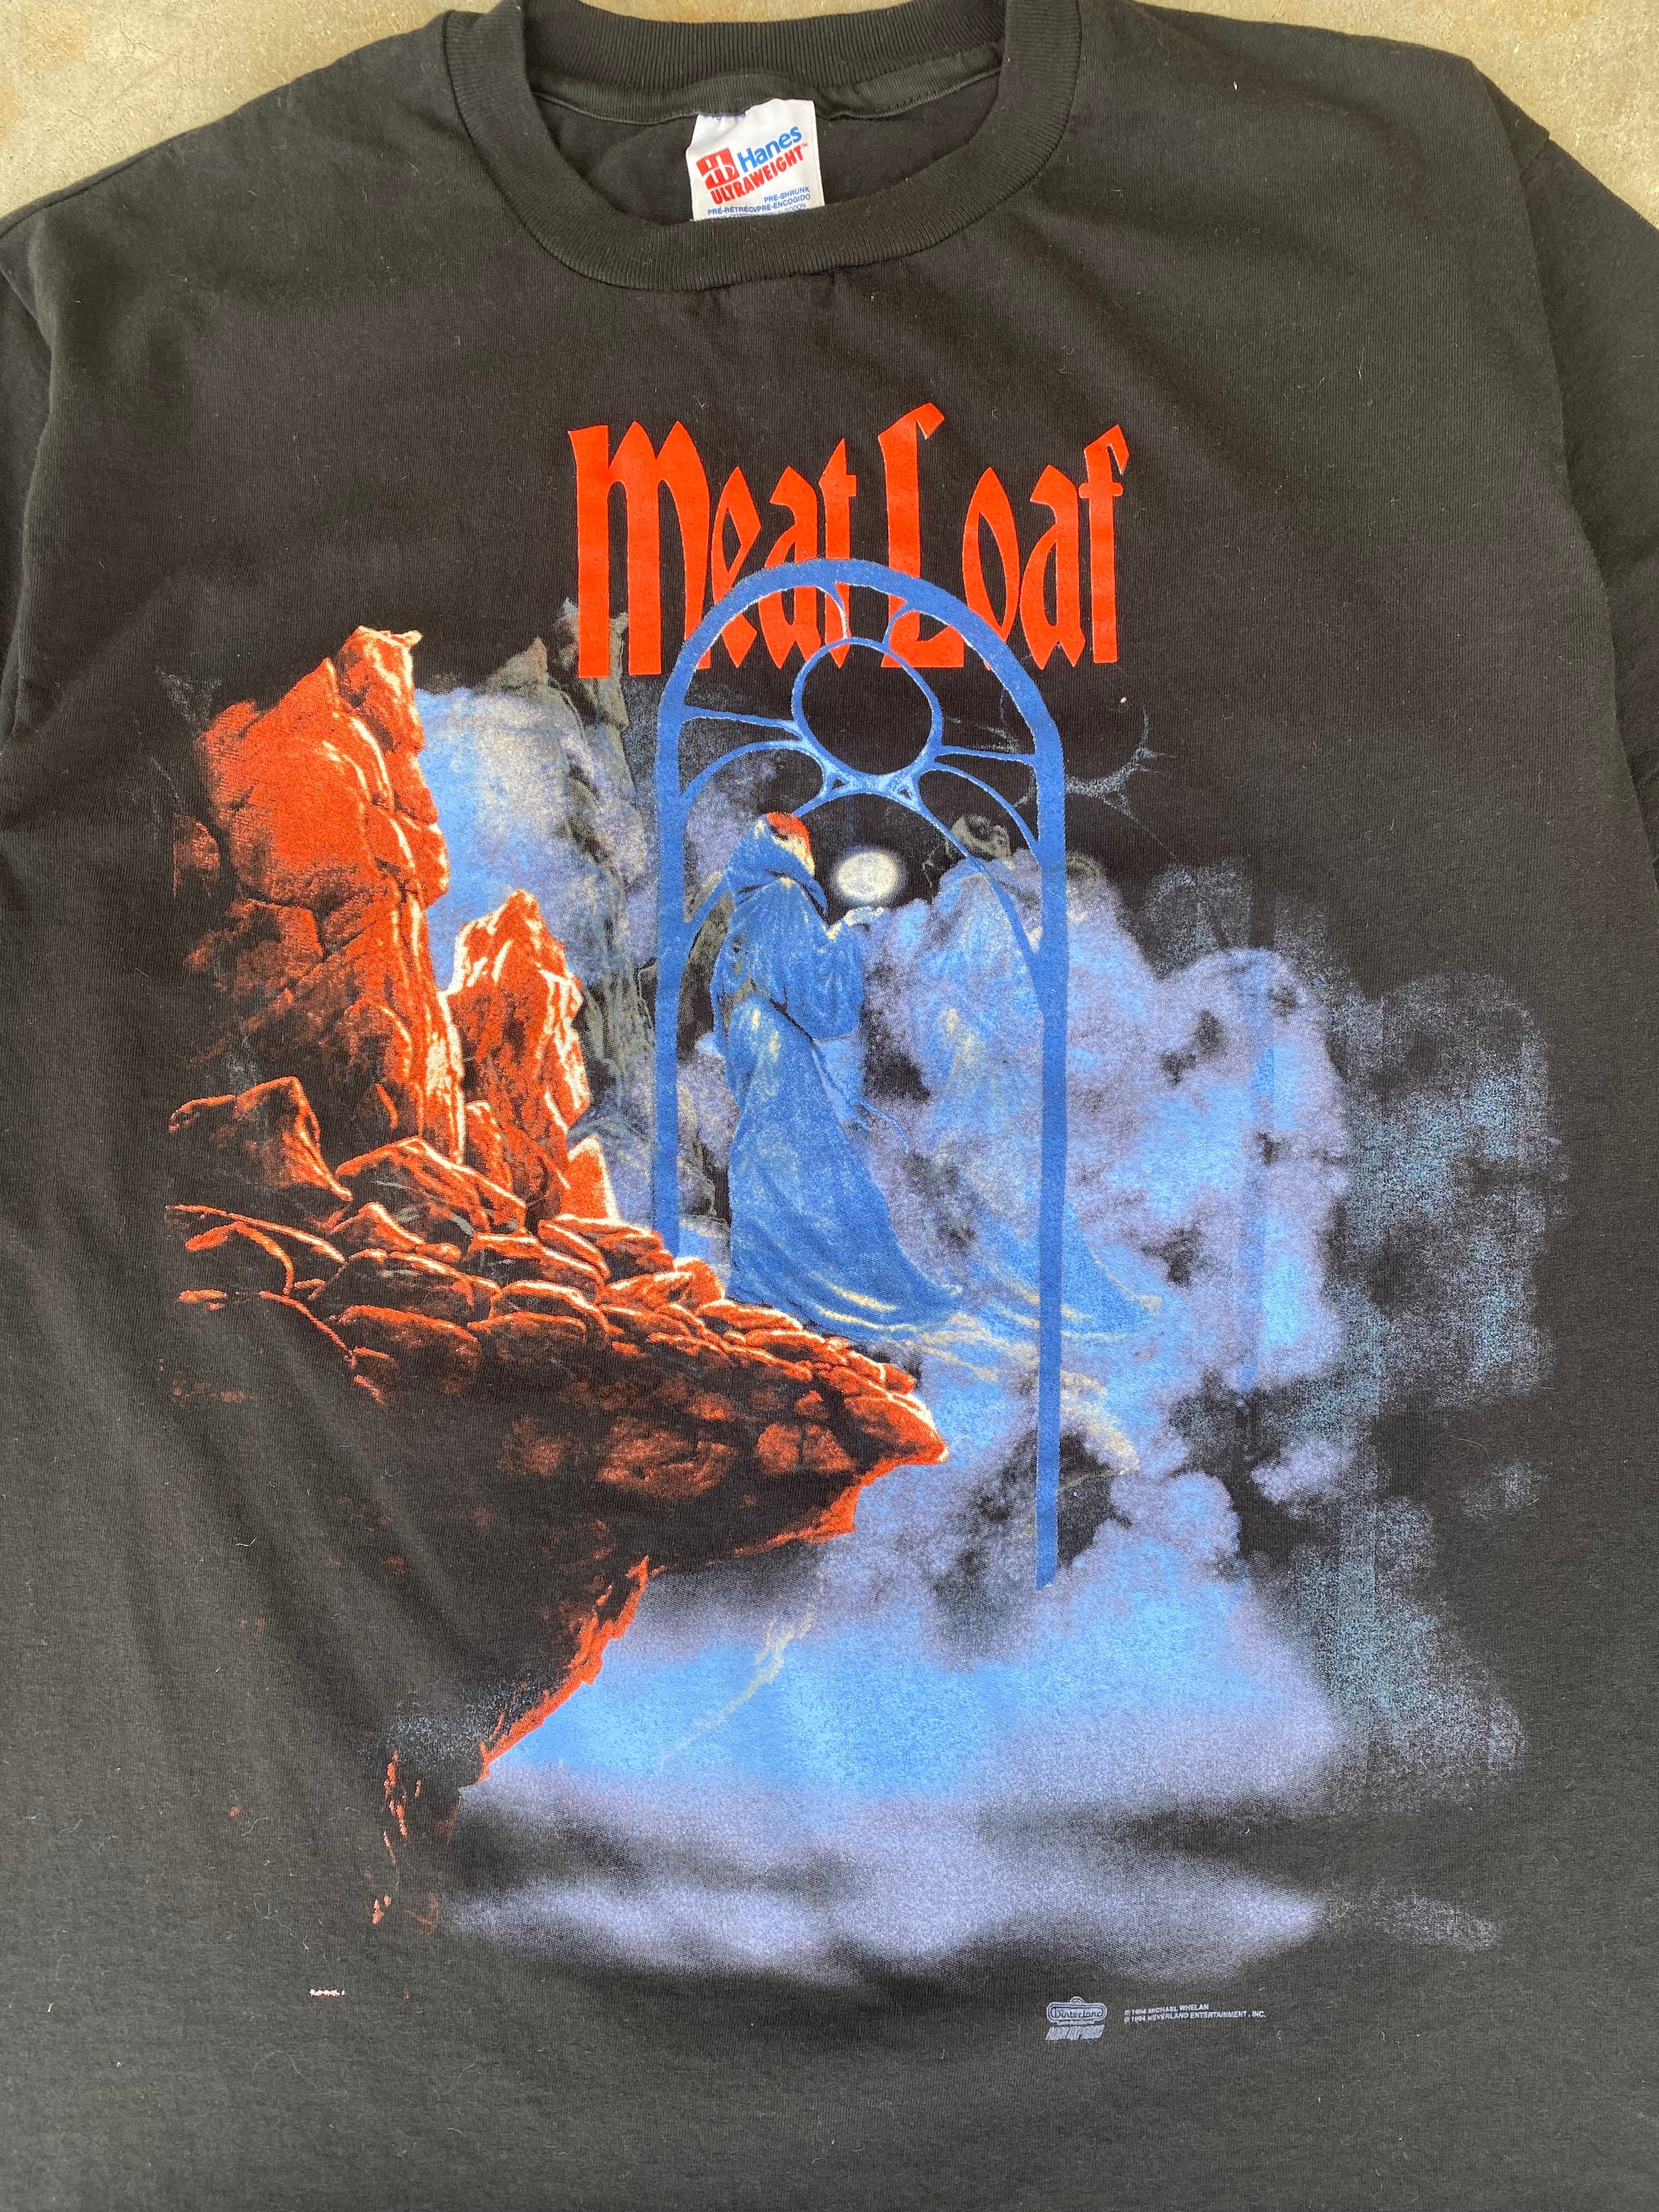 1994 Meatloaf Everything Louder Tour T-Shirt (M/L)